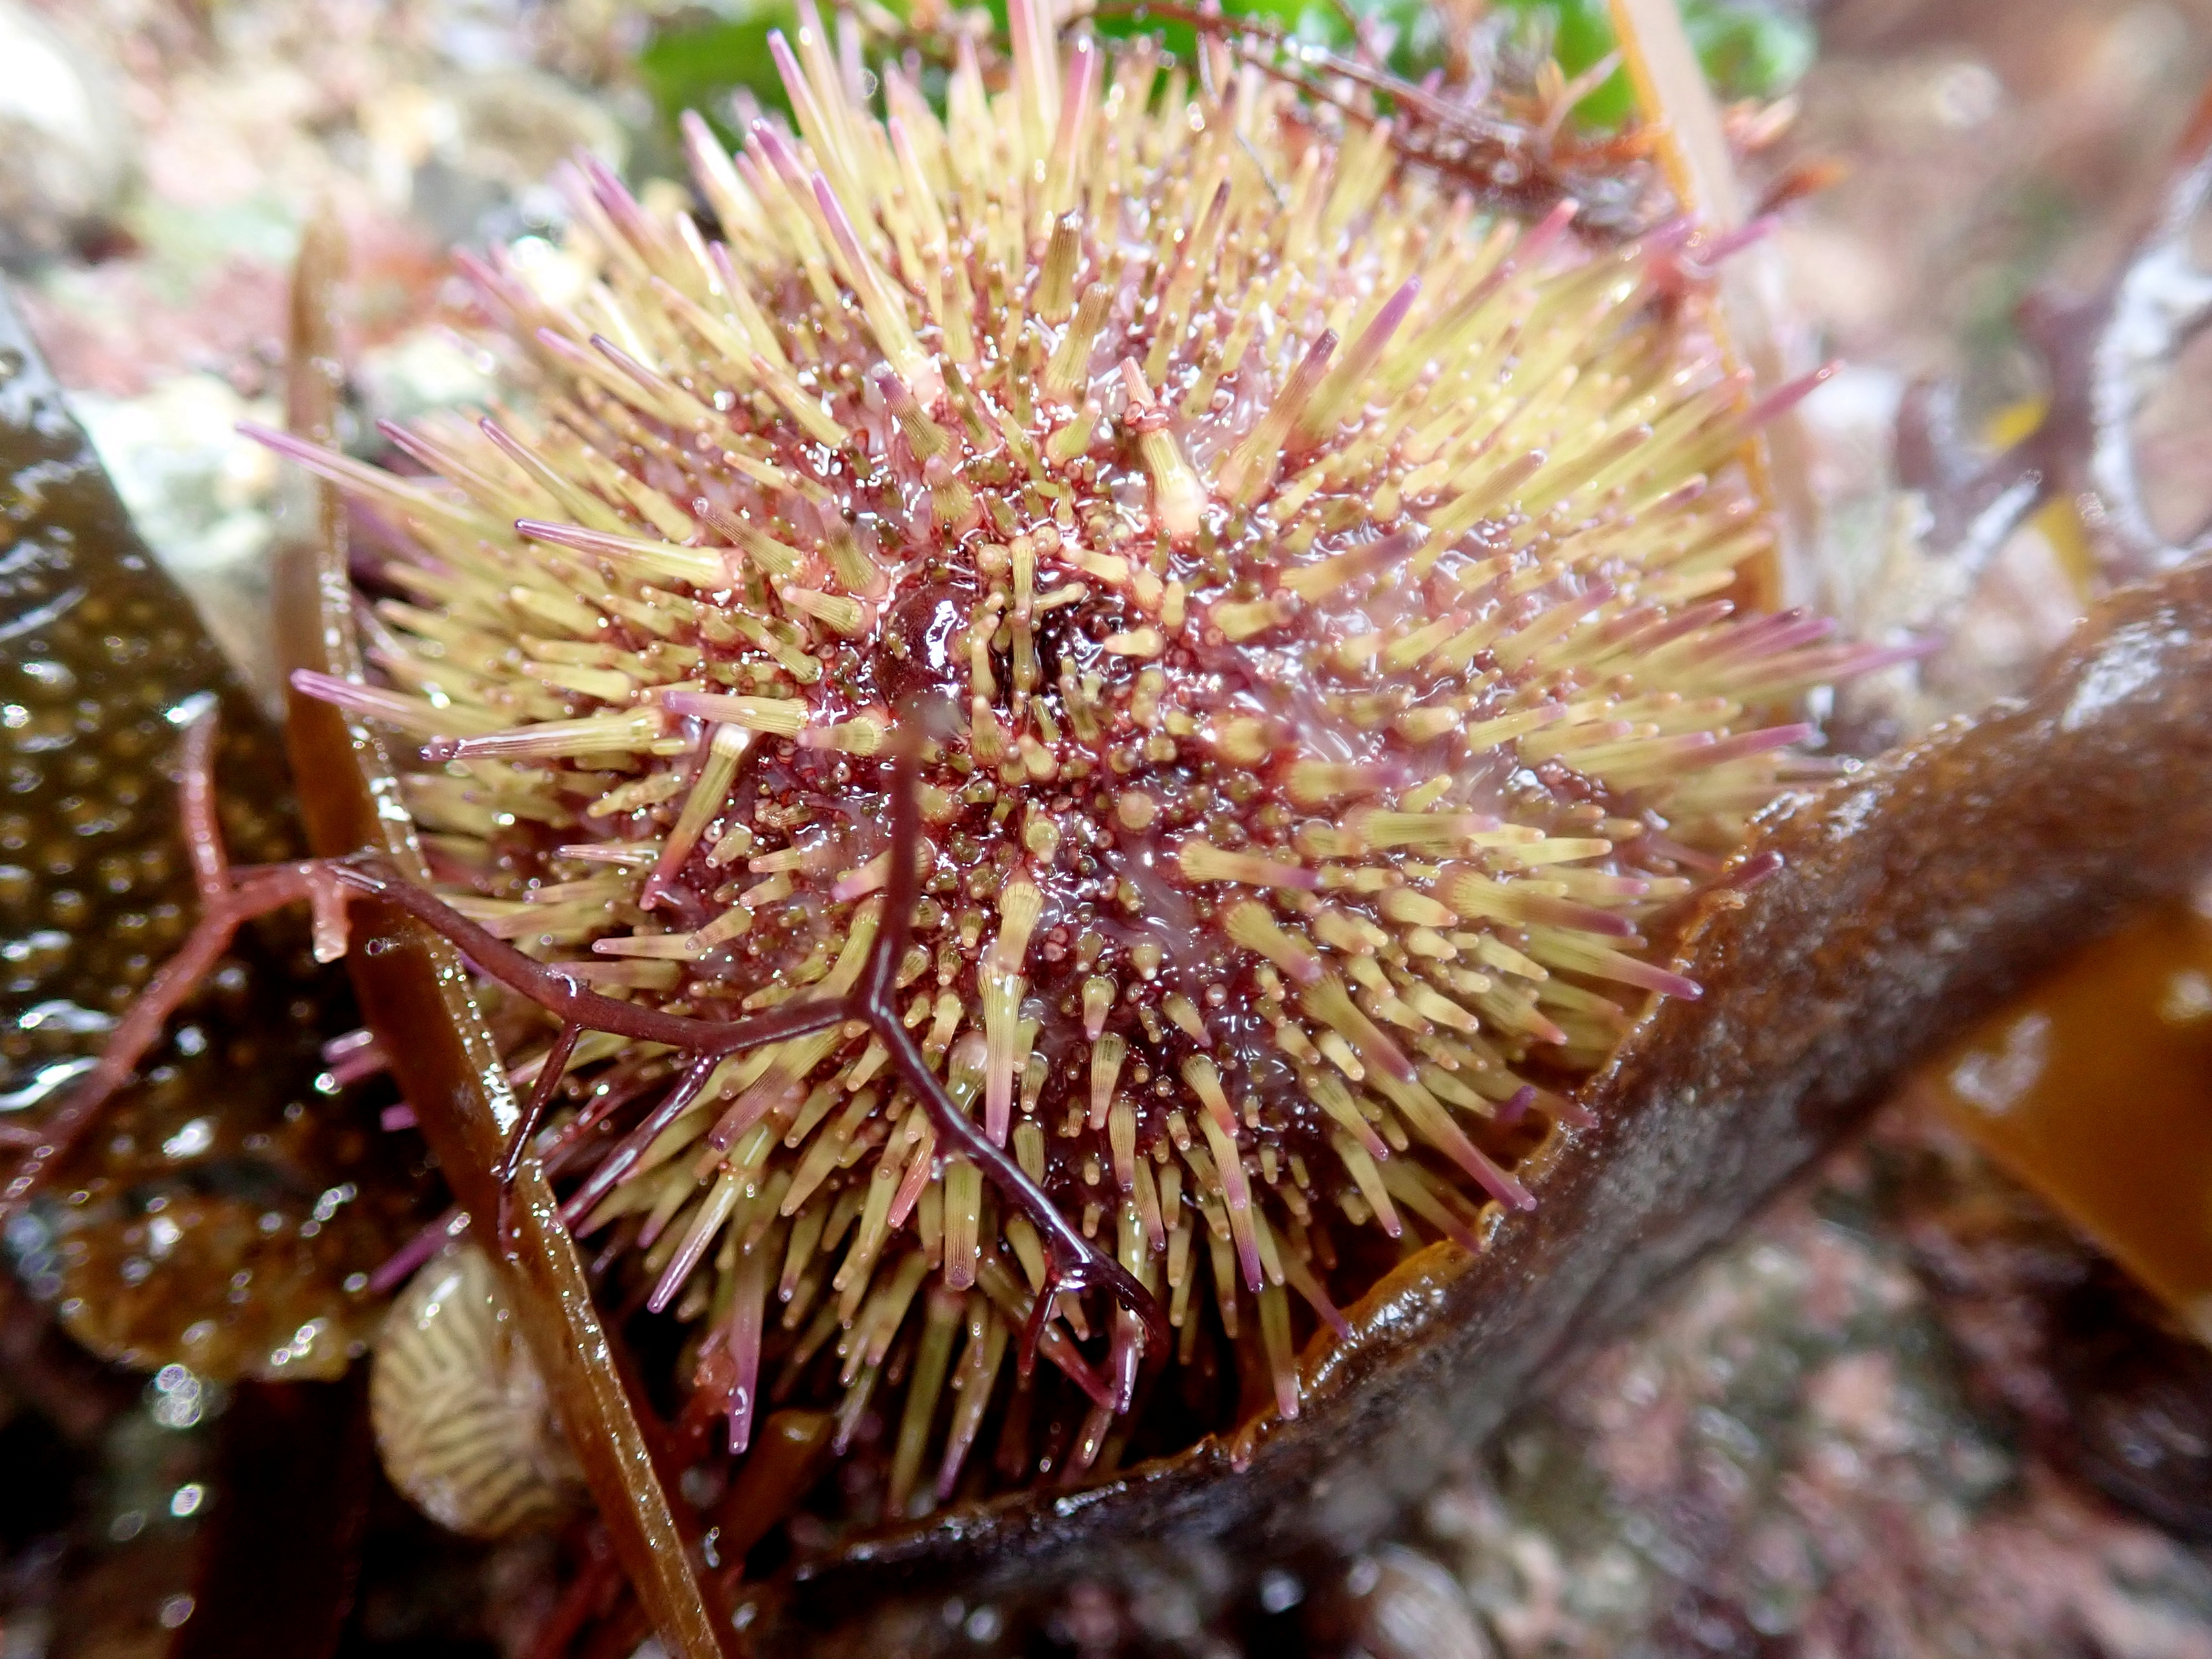 A green shore urchin with purple-tipped spines